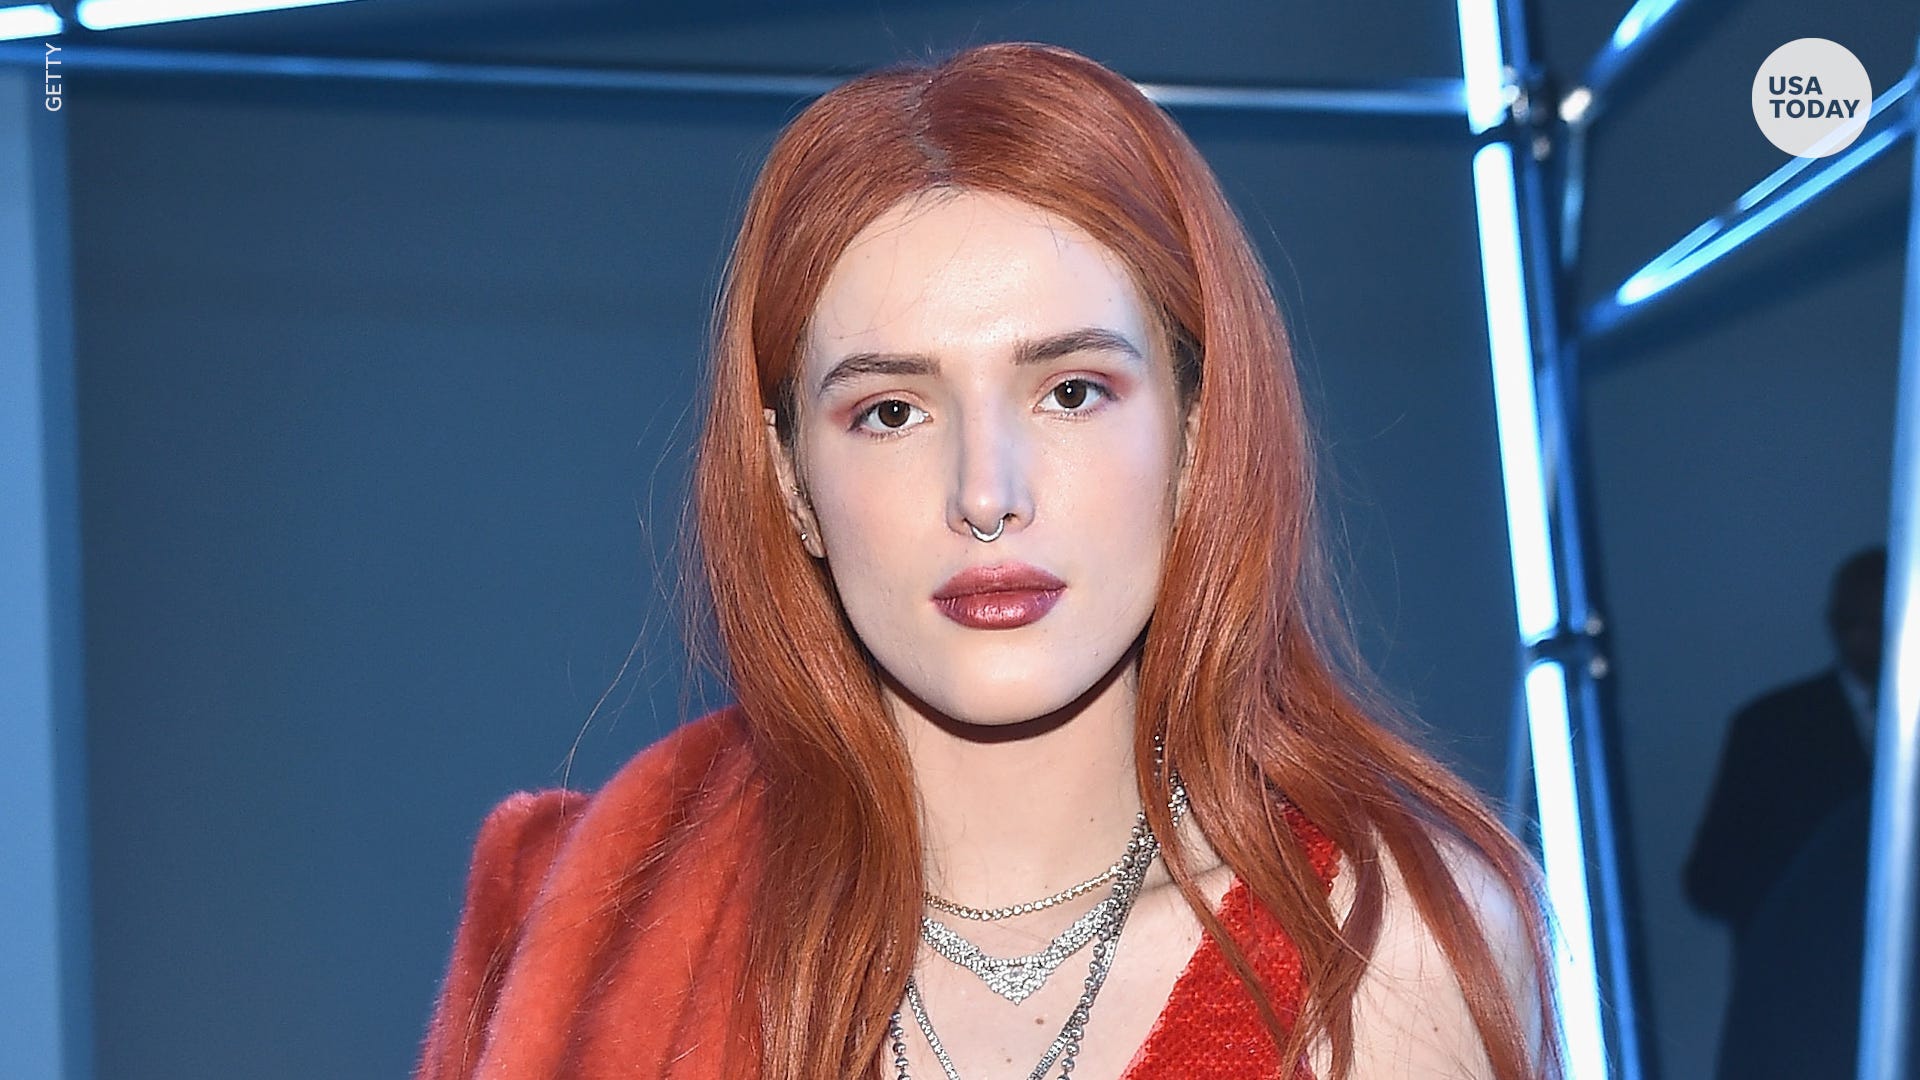 6 Yaer Old Porn Kidz - 'Shame on you': Bella Thorne is disgusted by Whoopi Goldberg's criticisms